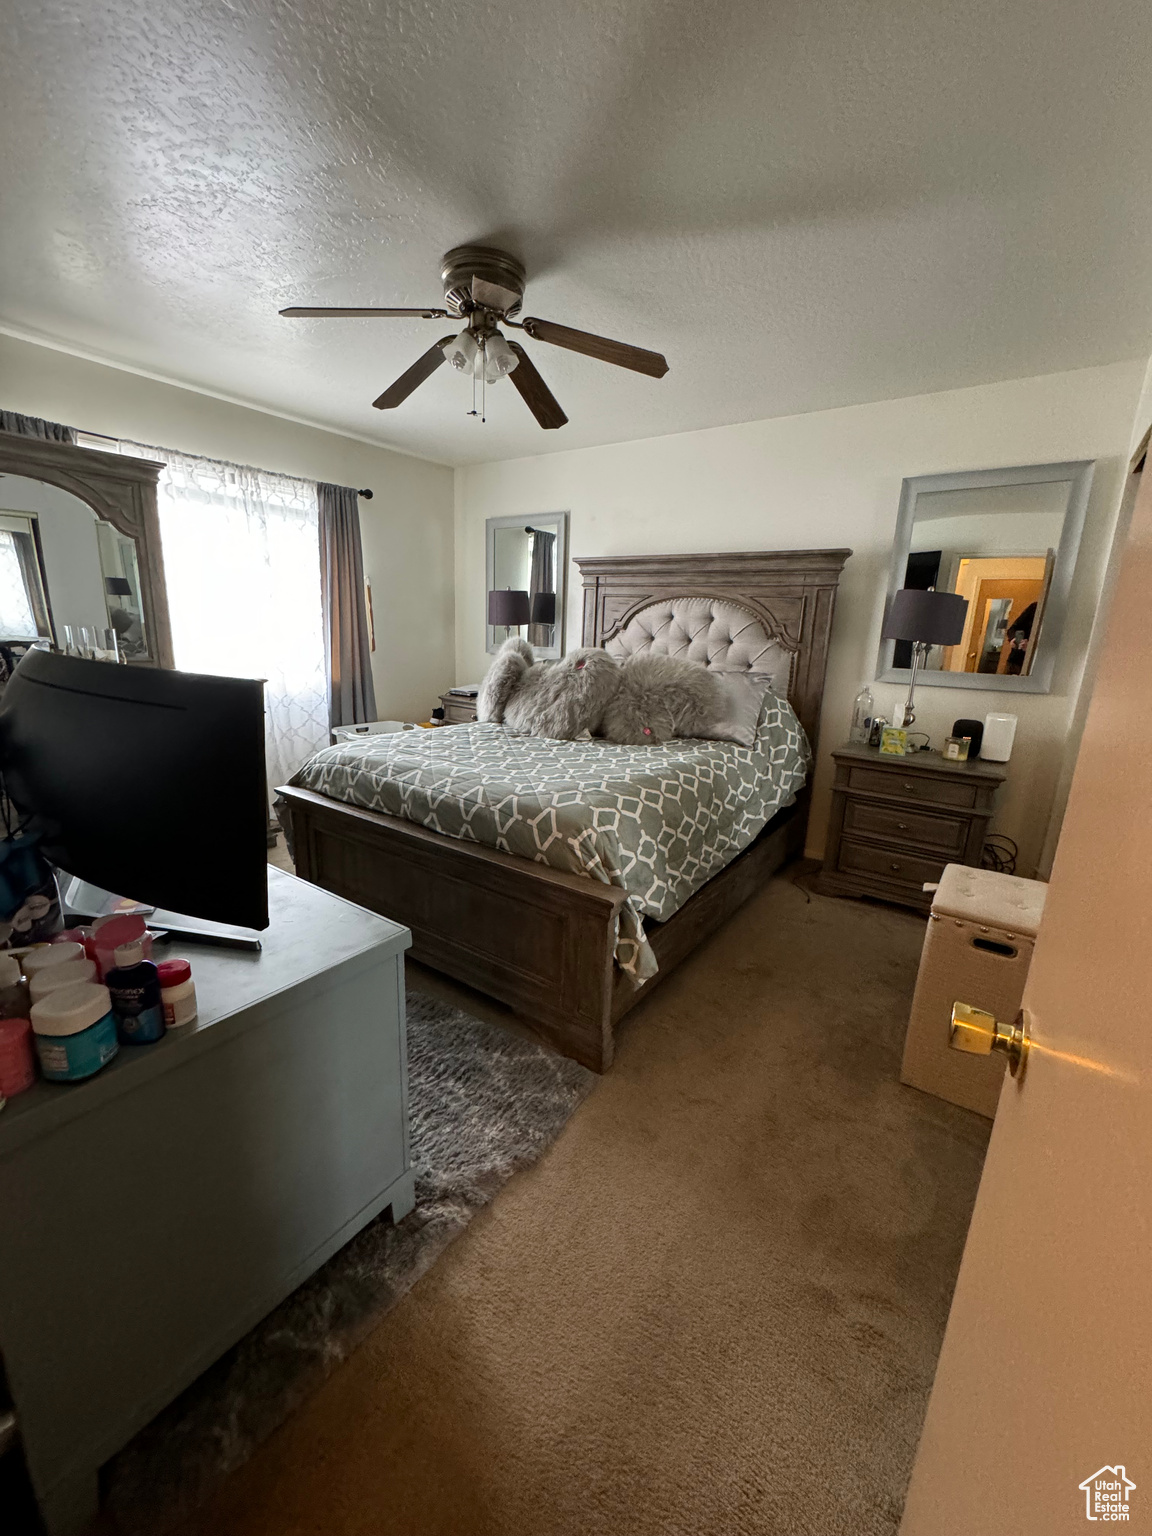 Bedroom with ceiling fan, dark carpet, and a textured ceiling